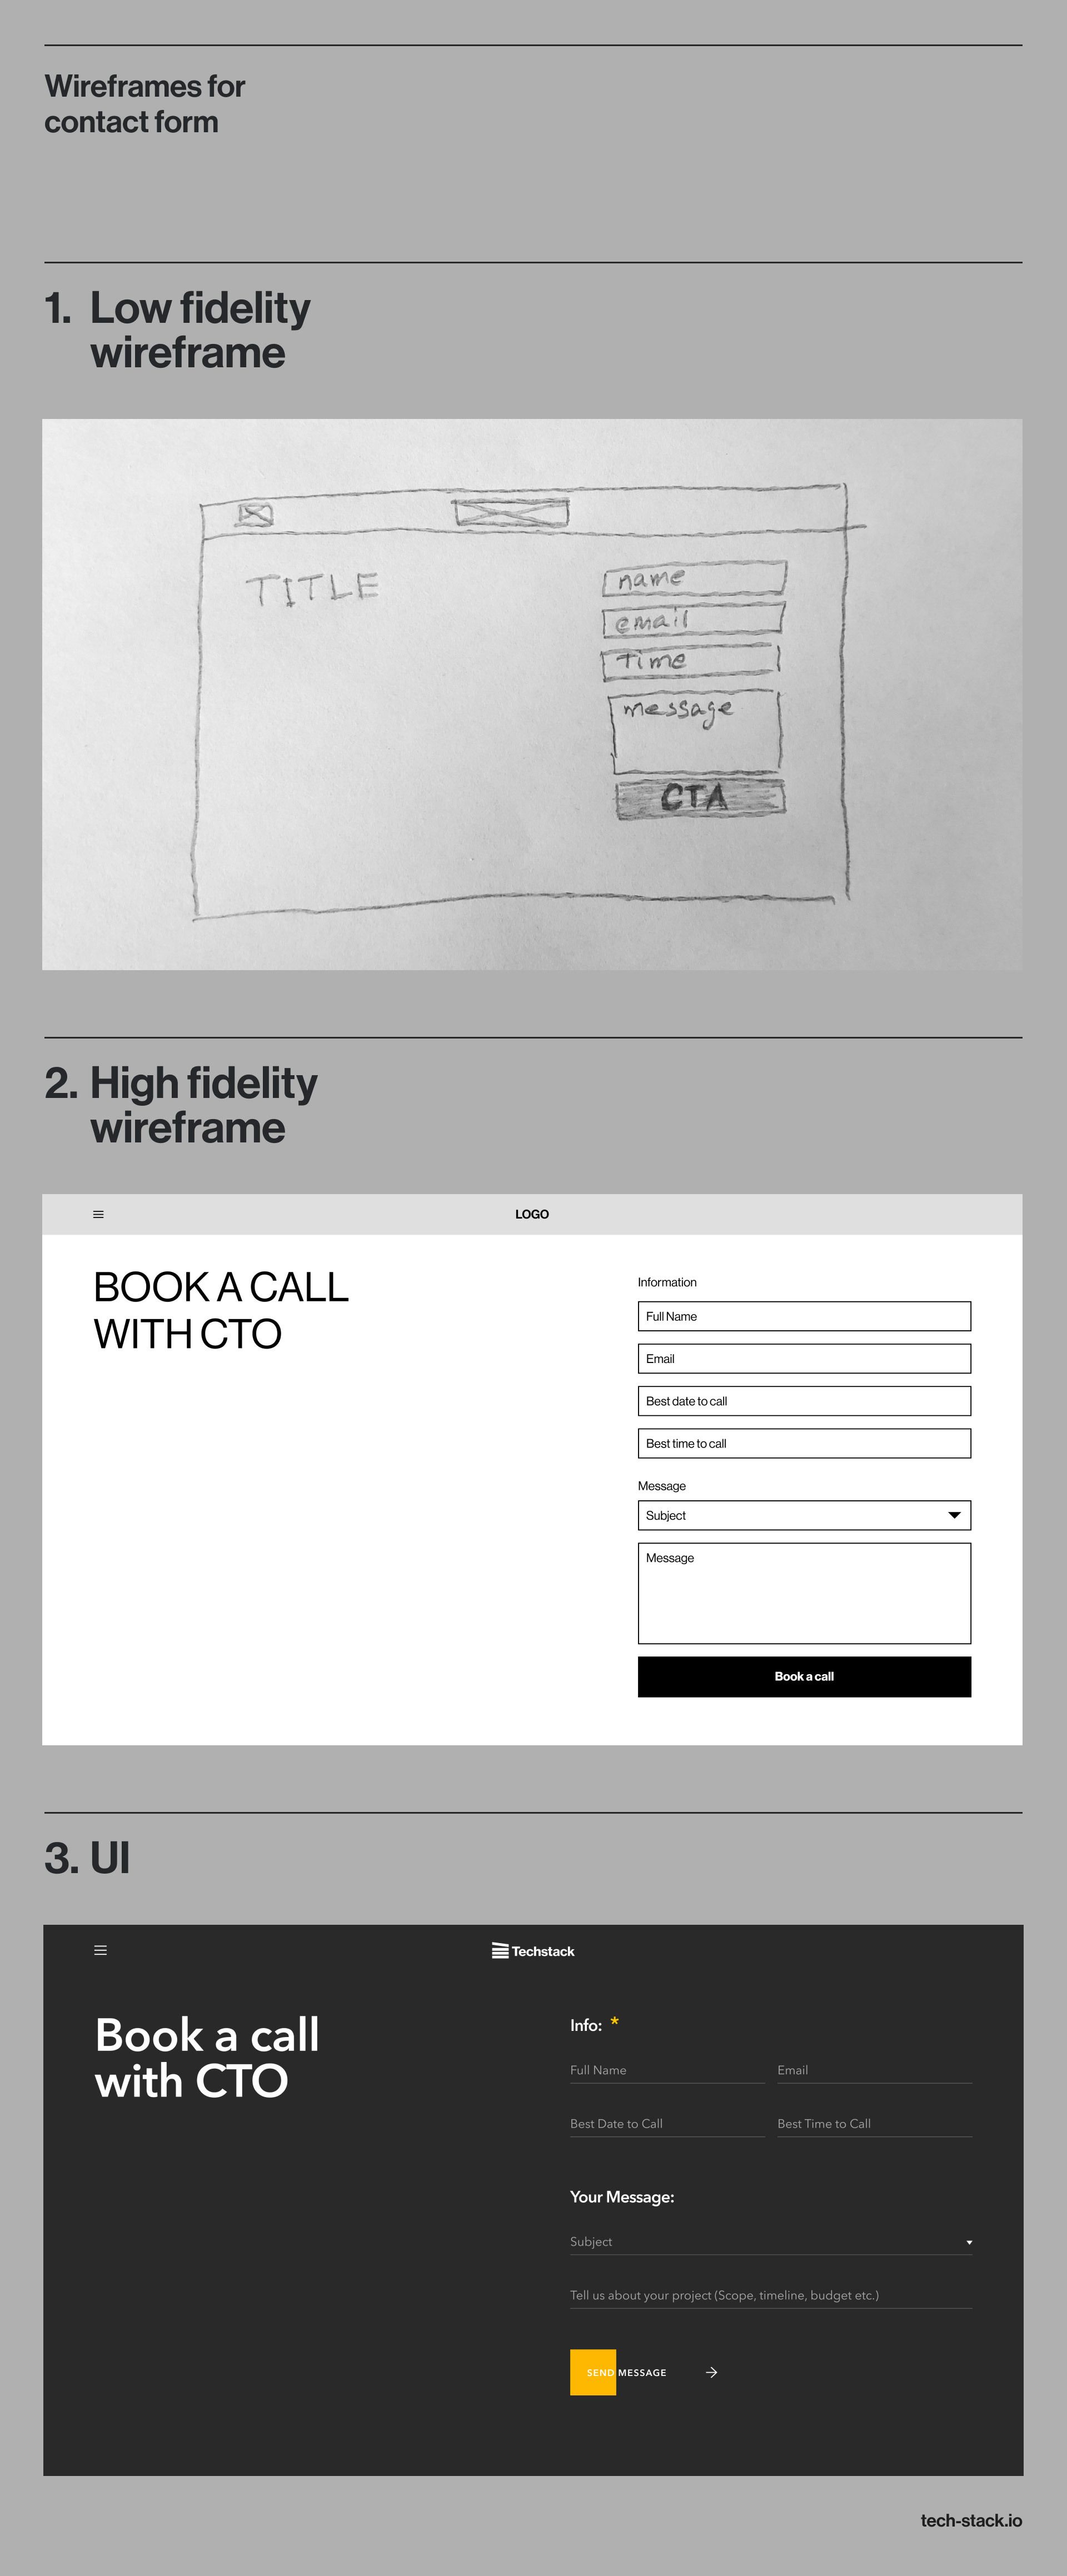 Wireframes for contact form